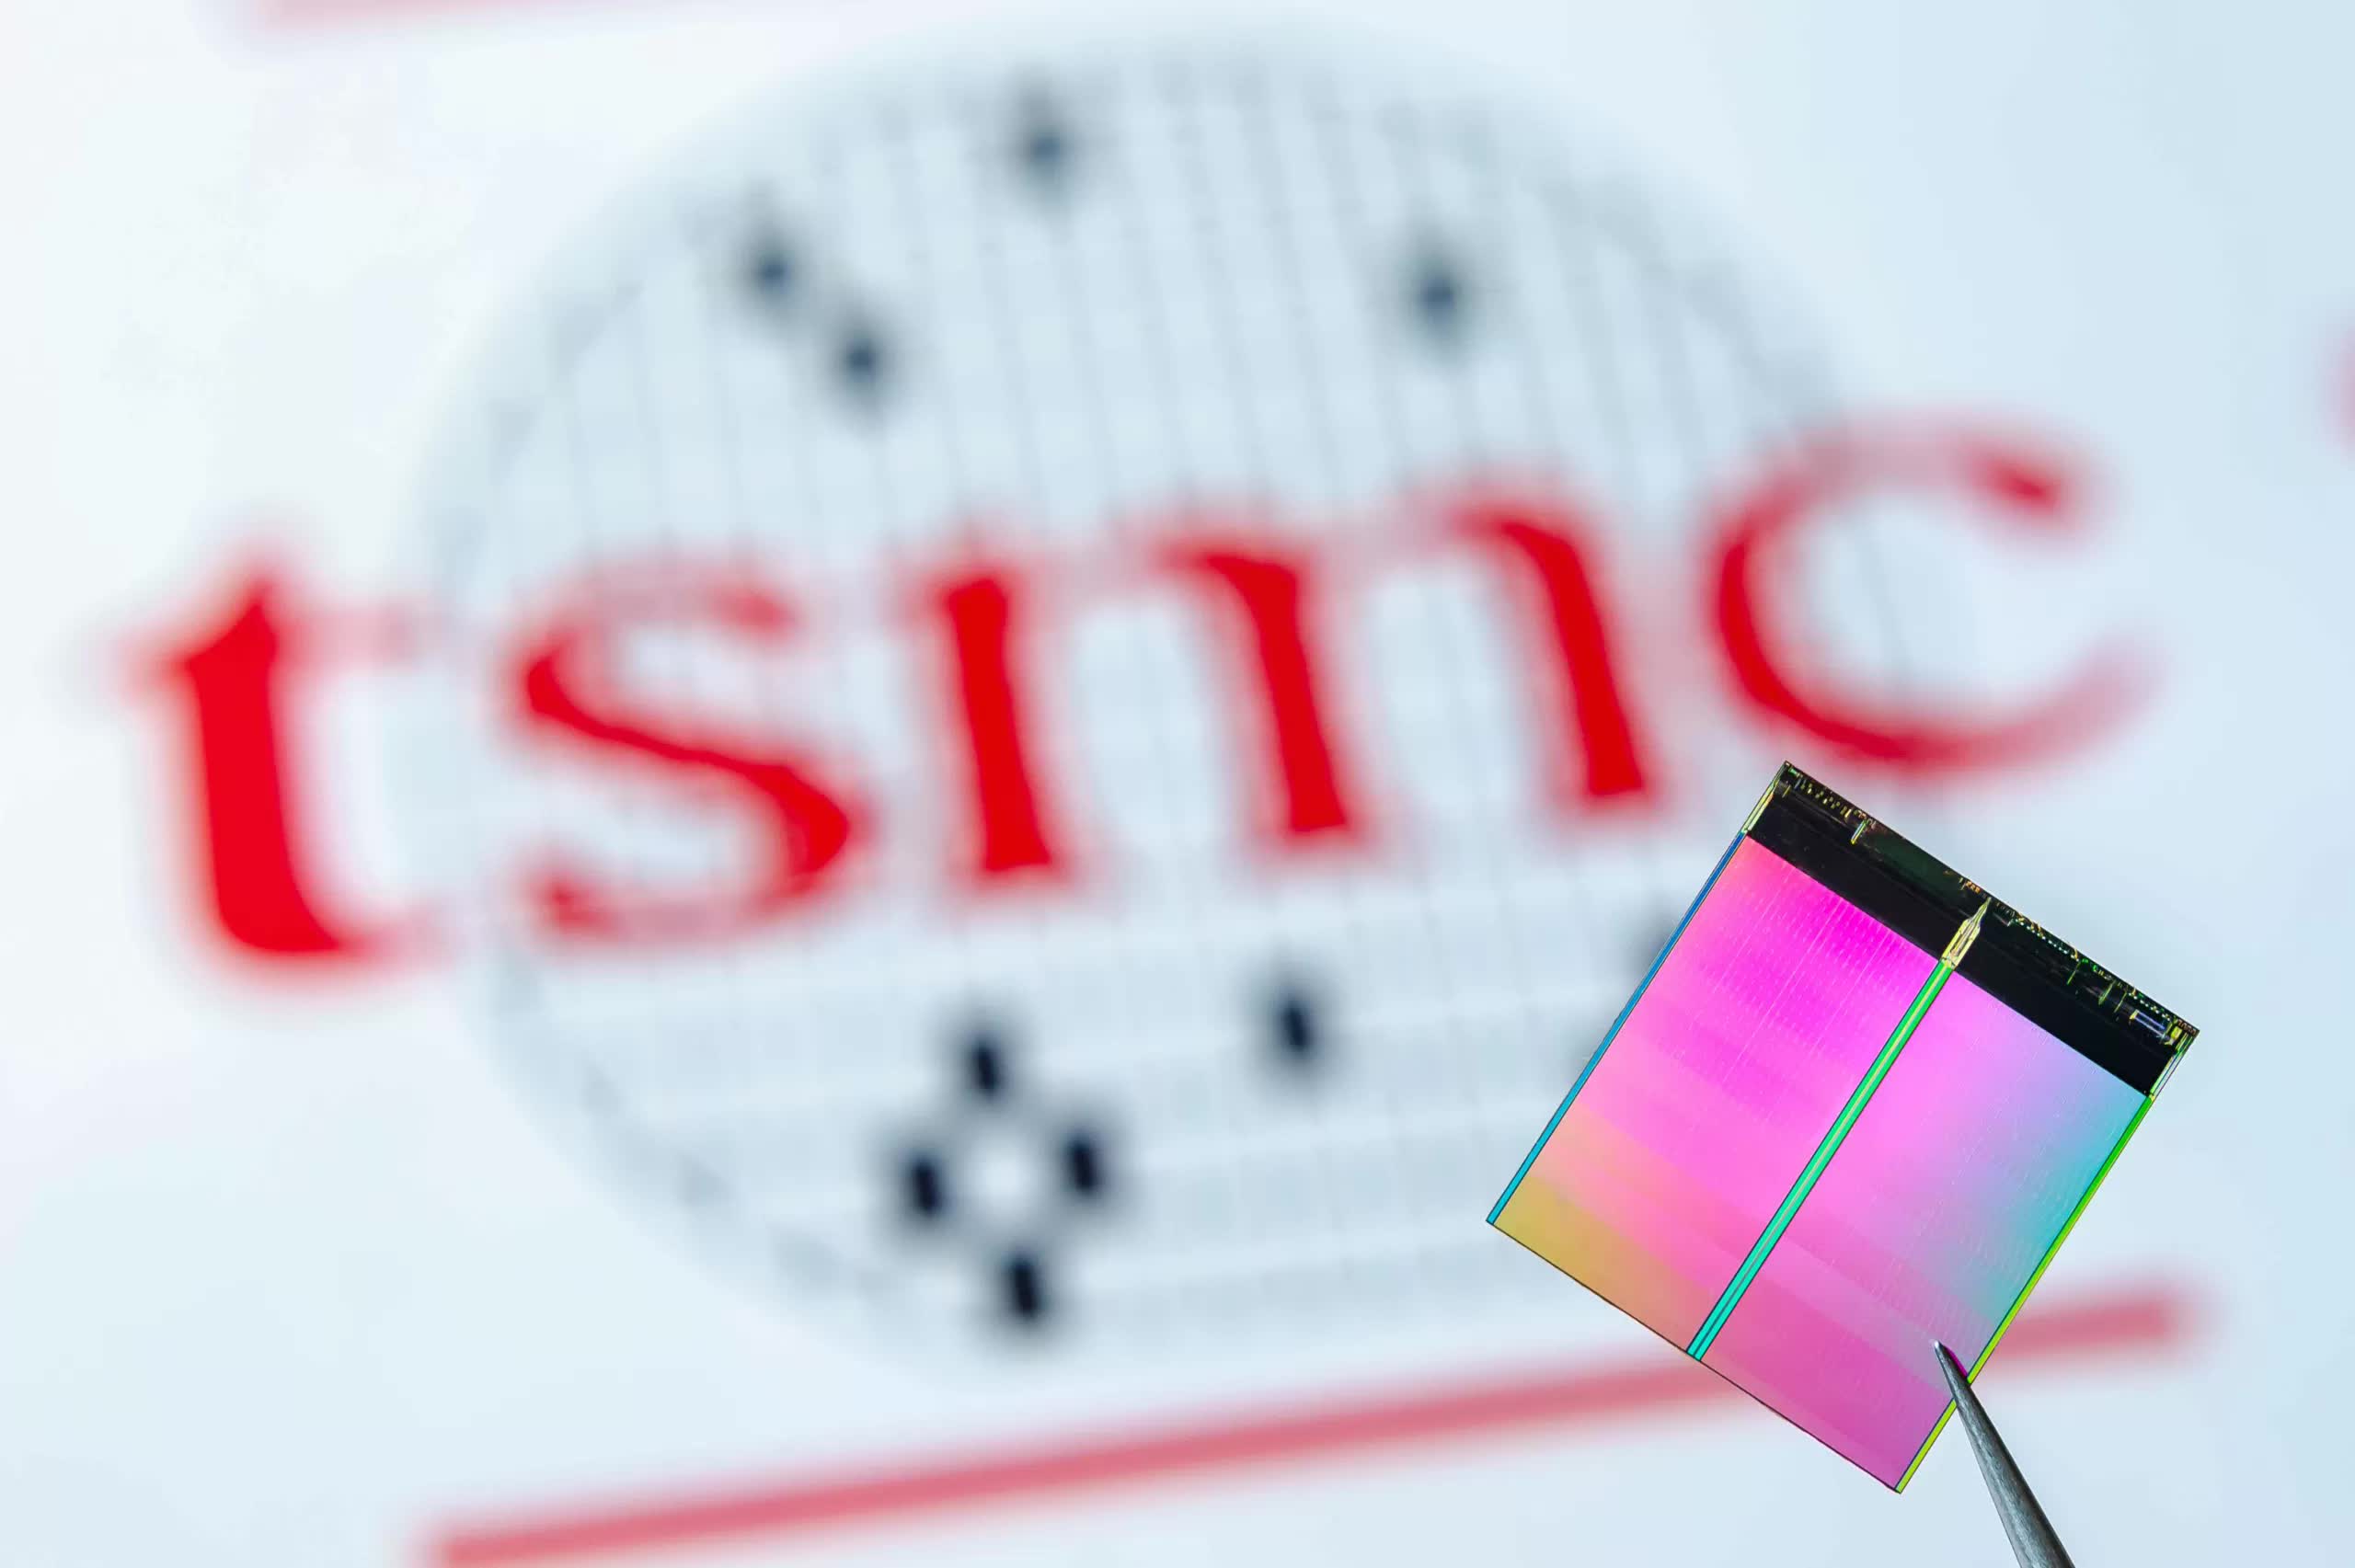 TSMC increases revenue forecast in sign that demand is better than feared